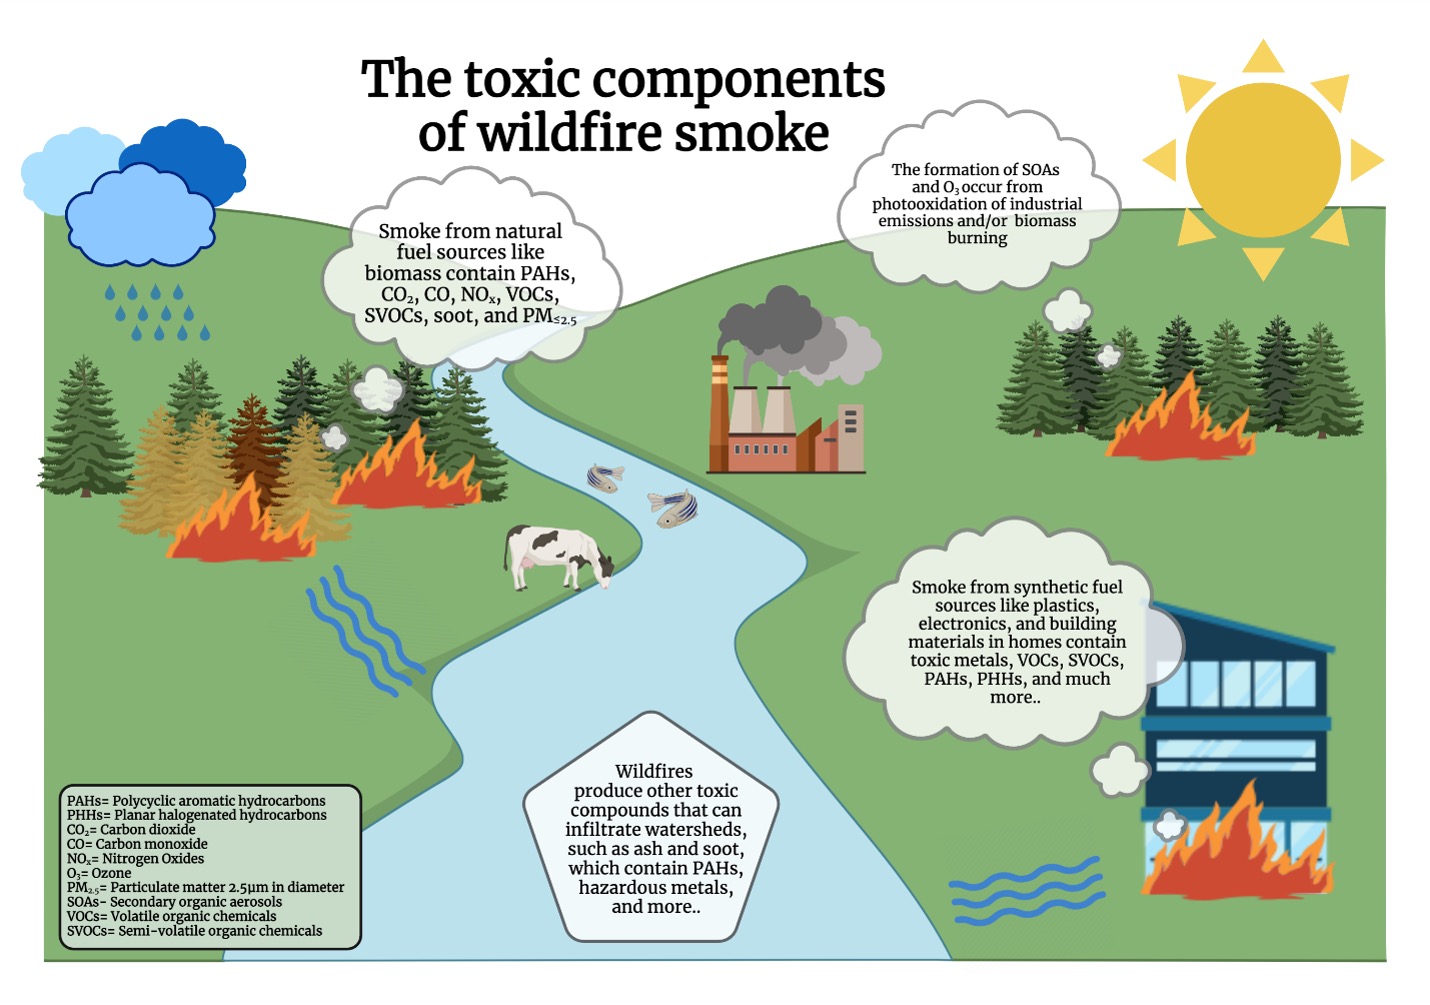 Wildfires produce toxic substances.